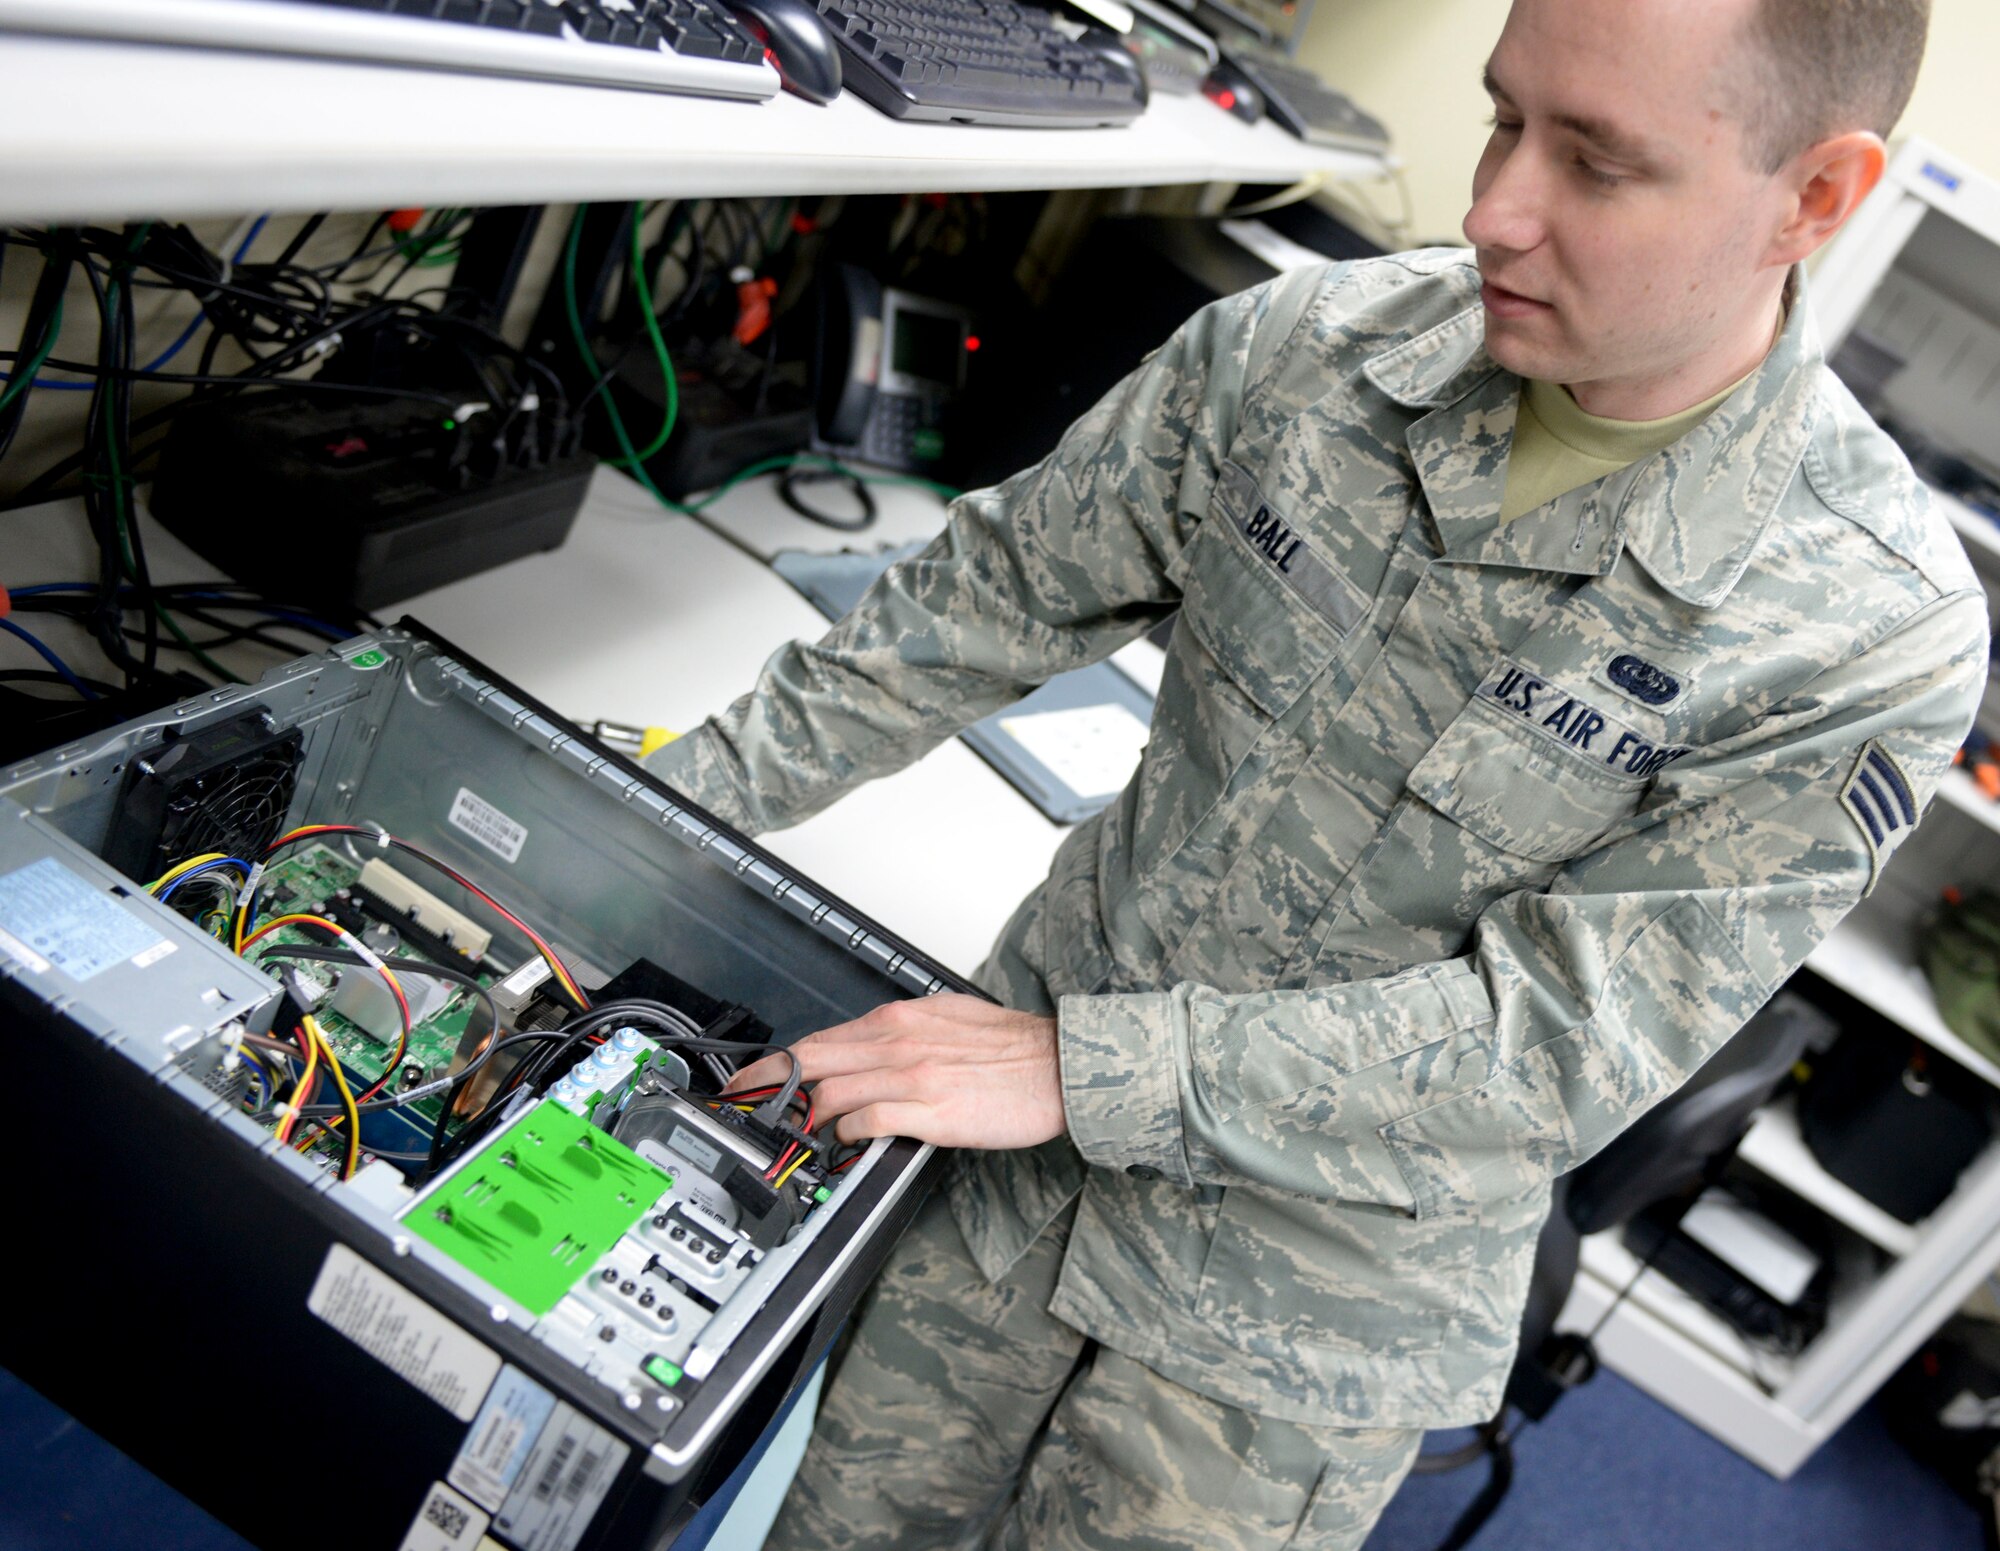 Senior Airman Chris Ball, 36th Communications Squadron client system technician, fixes an incorrectly installed heat sync, Nov. 19, 2014 on Andersen Air Force Base, Guam.  The 36th CS won the Air Force Information Dominance Small Unit Award for best communication squadron at the major command level for 2014. (U.S. Air Force photo by Staff Sgt. Robert Hicks/Released)  